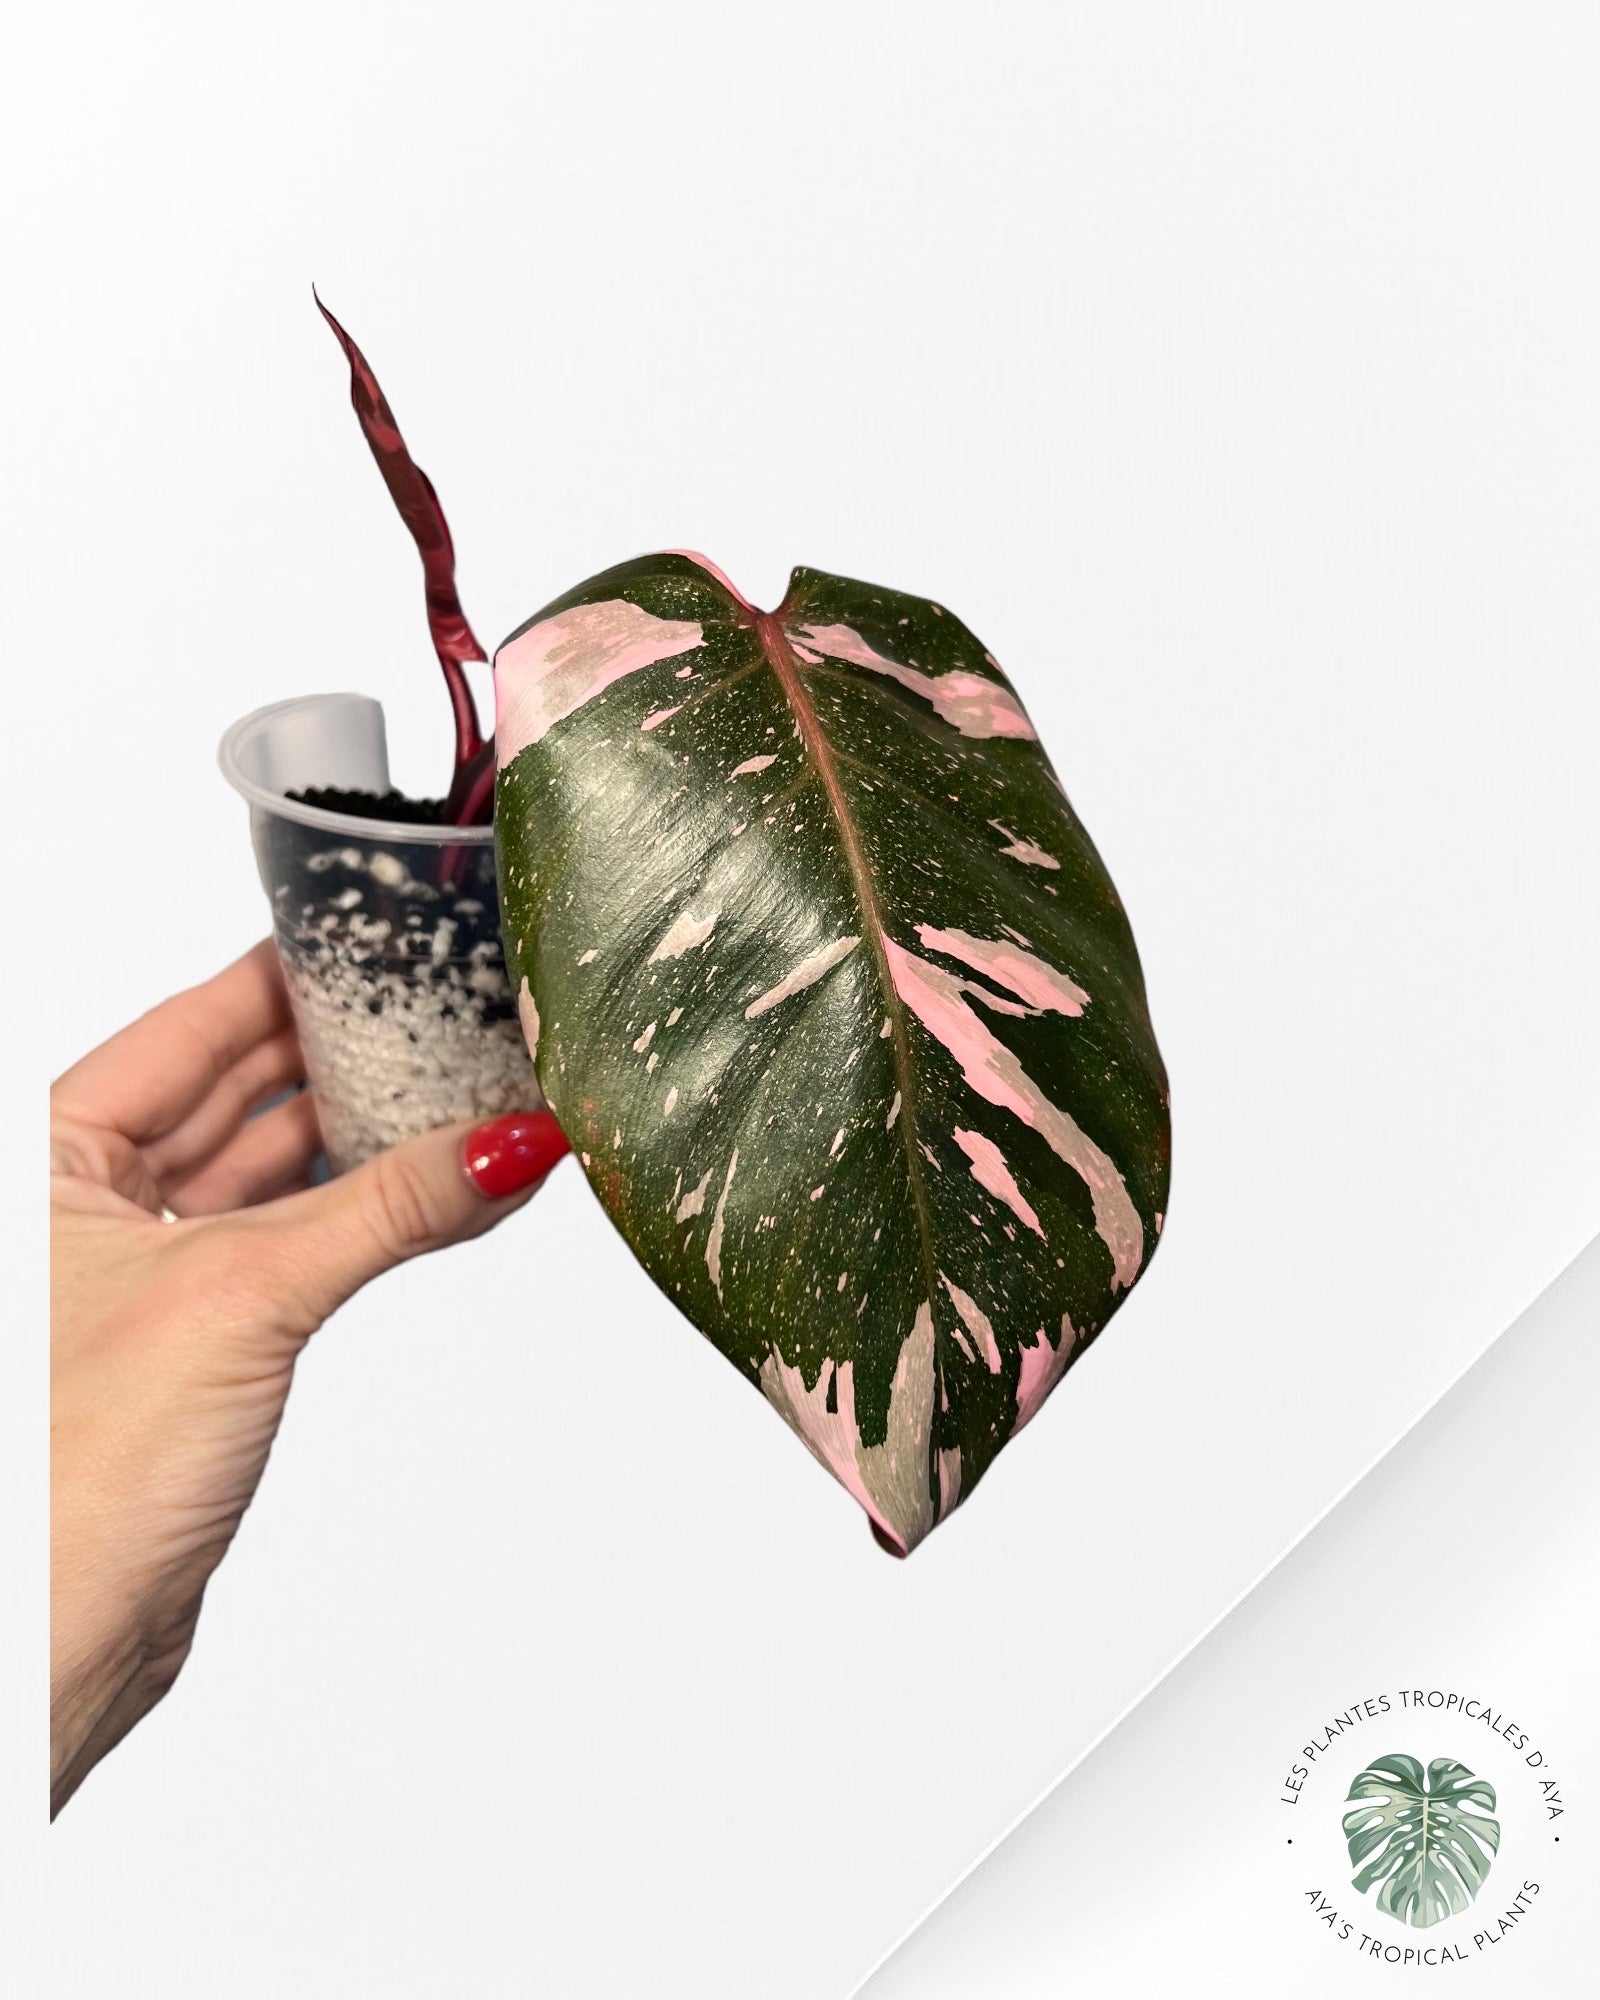 Philodendron Pink Princess Marble King-PO0724